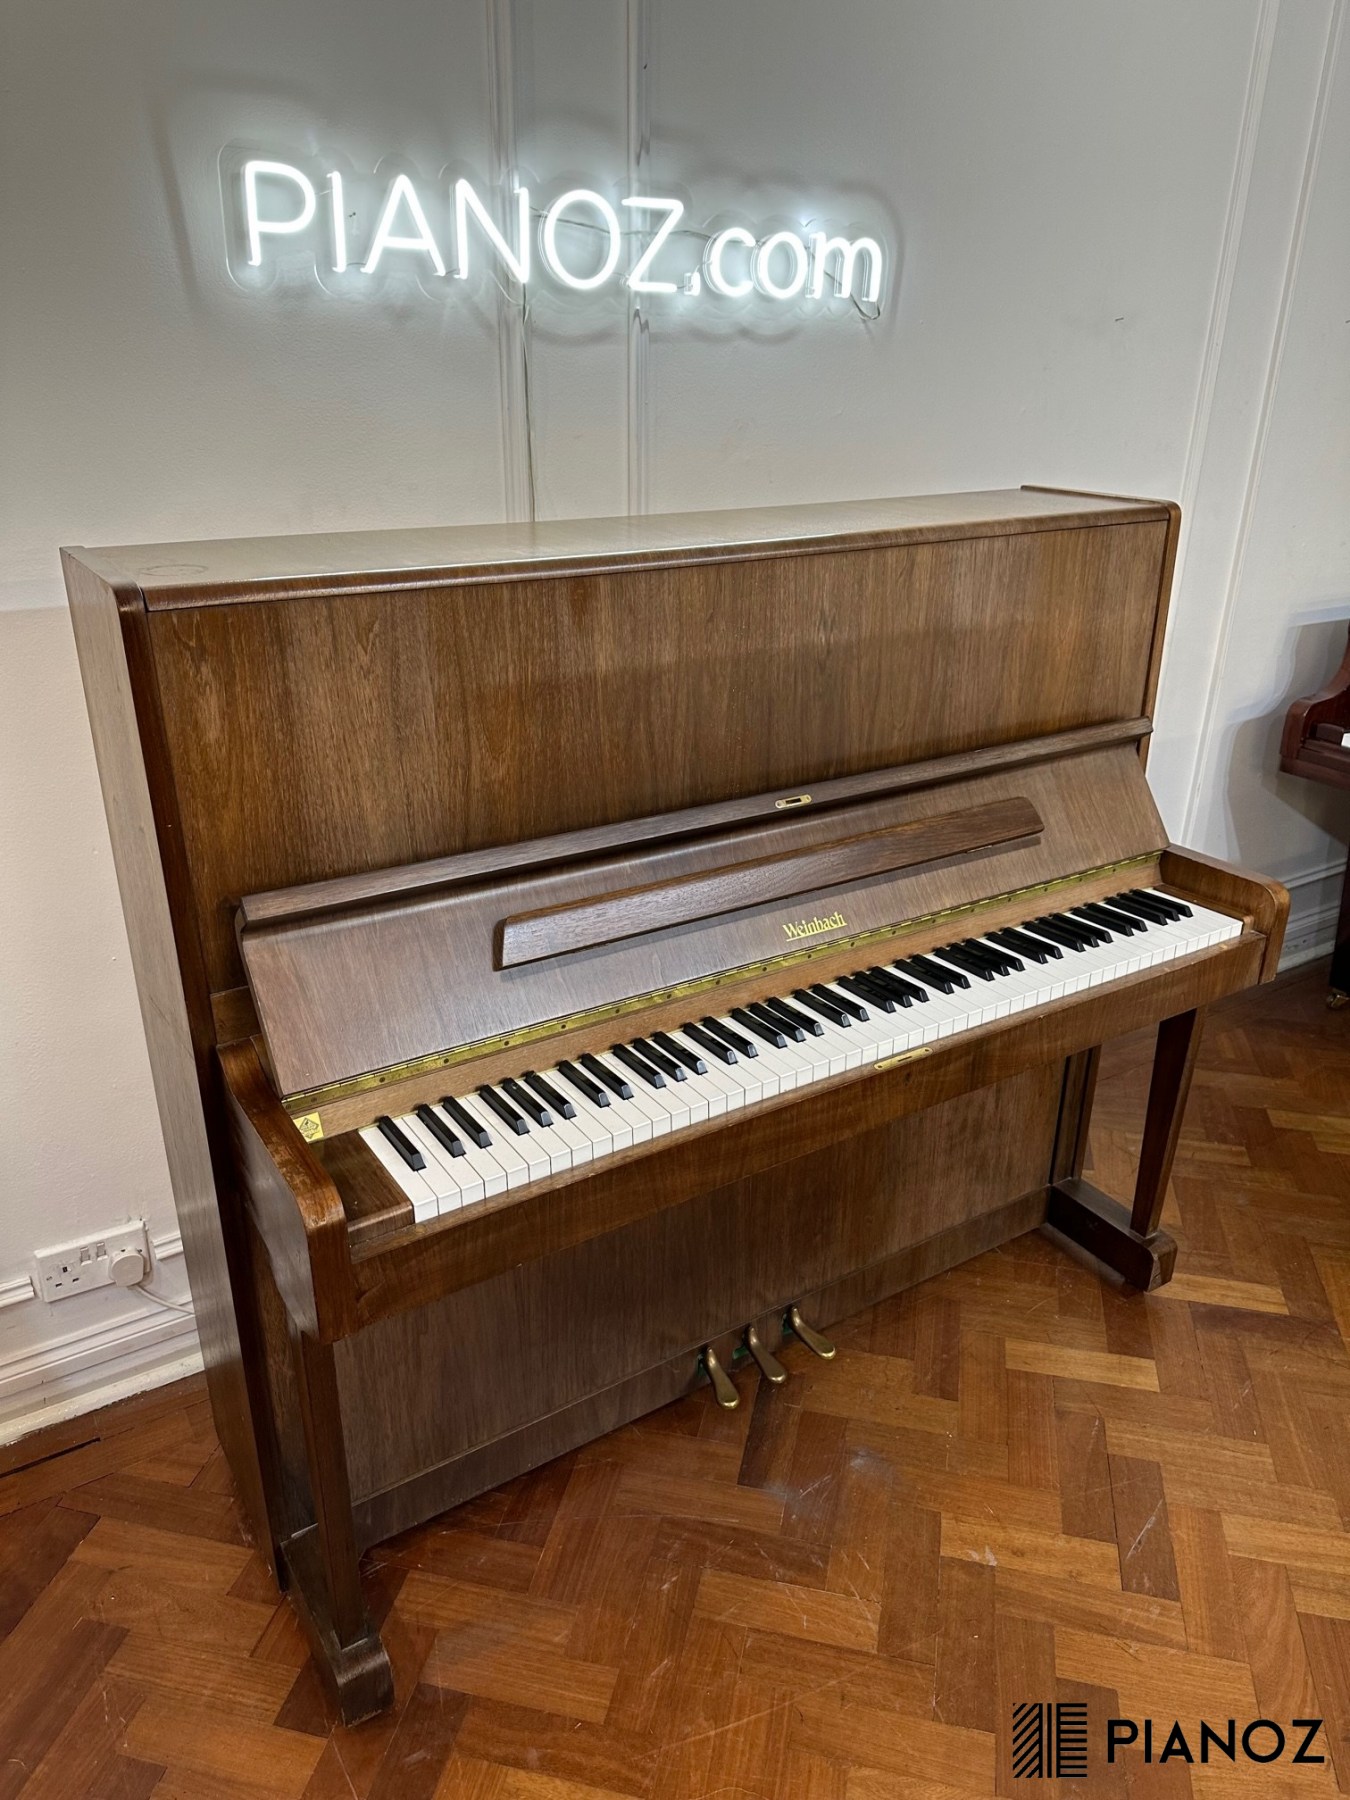 Weinbach by Petrof 125 Upright Piano piano for sale in UK